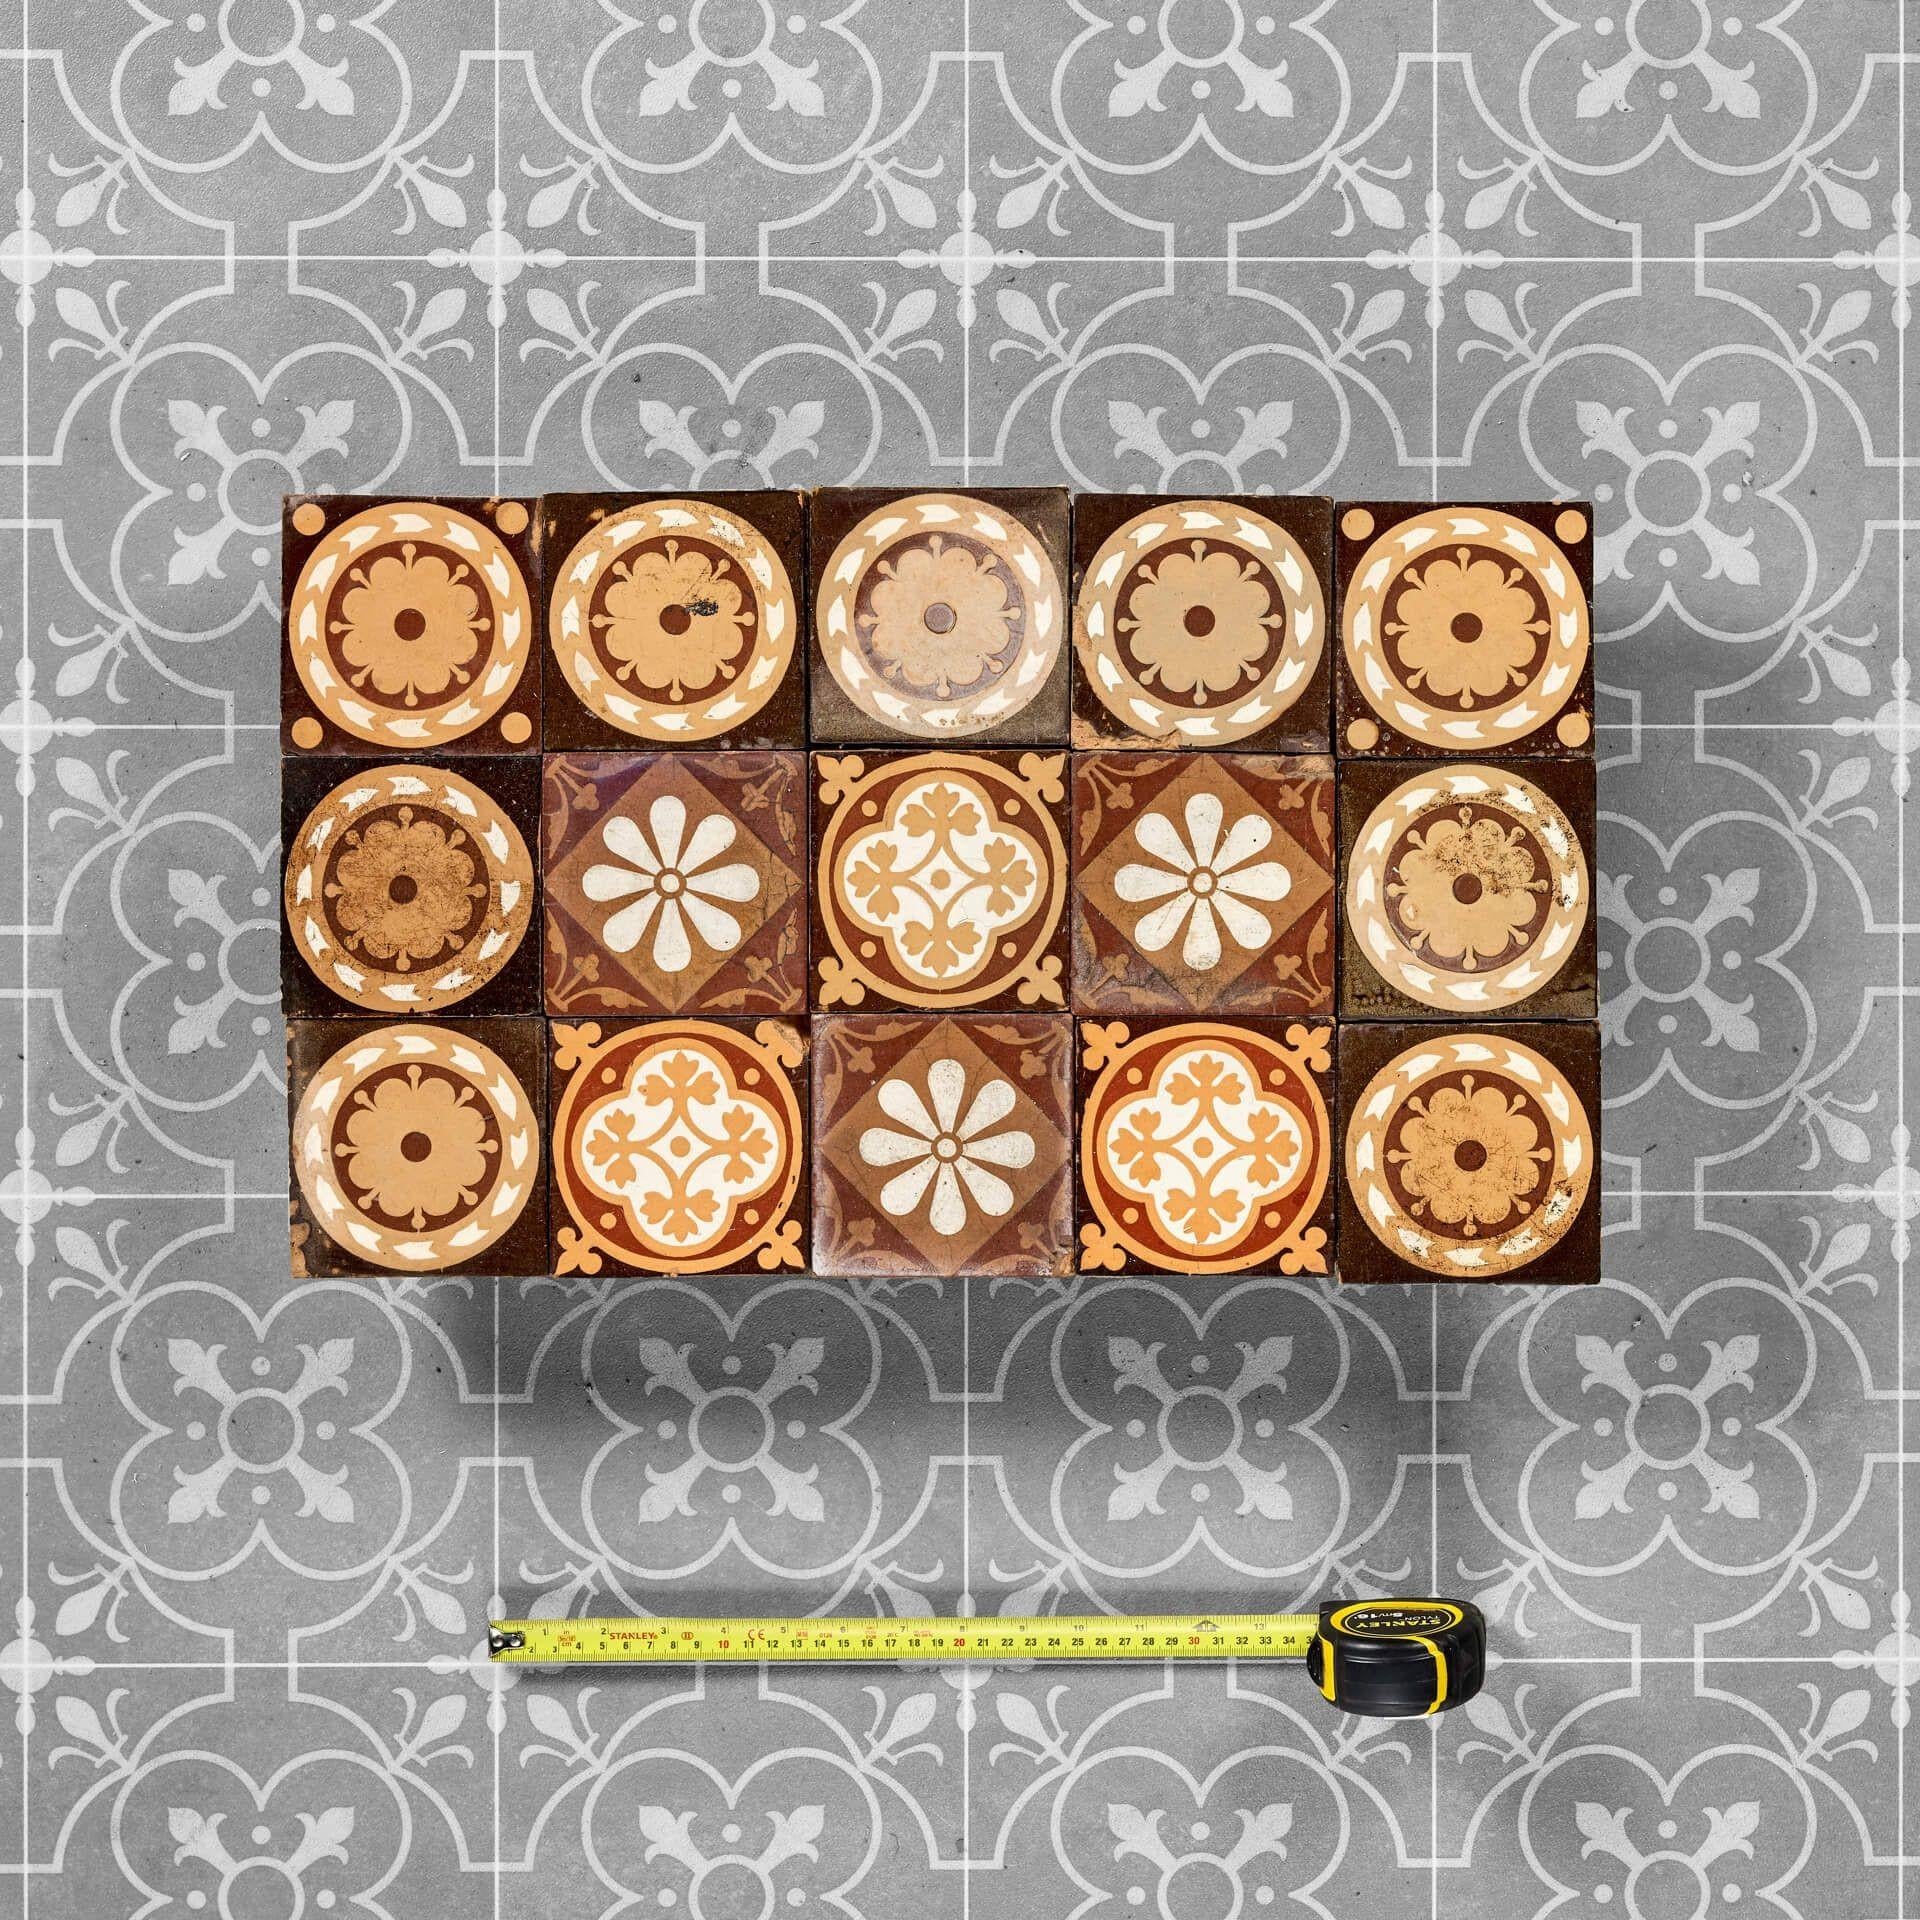 A small set of 15 brown glazed ceramic 10.5cm square tiles, perfect for use as an antique tile backsplash in a period cottage or Victorian kitchen. Dating from the late 19th century, these antique tiles are decorated with floral themes, bringing a